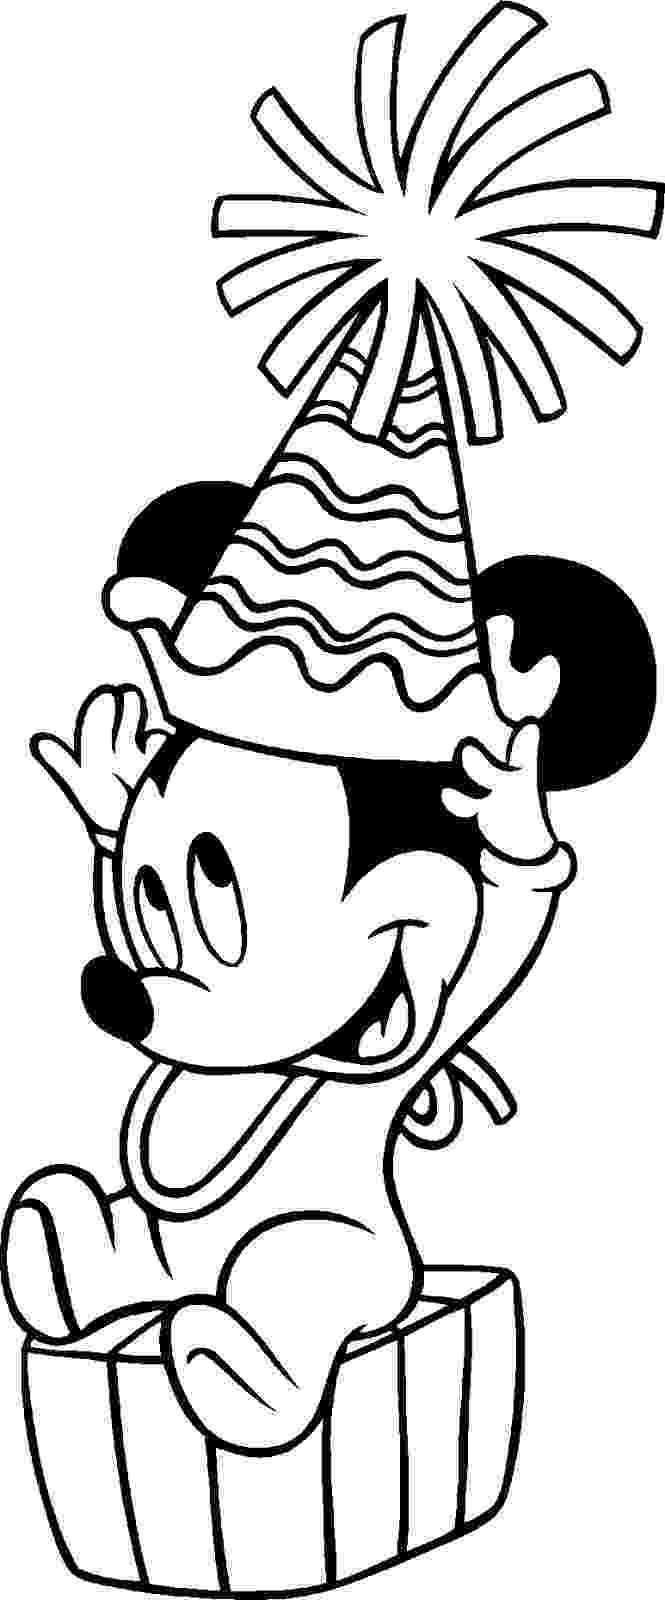 baby mickey mouse colouring pages baby mickey mouse and minnie mouse coloring pages colouring pages baby mouse mickey 